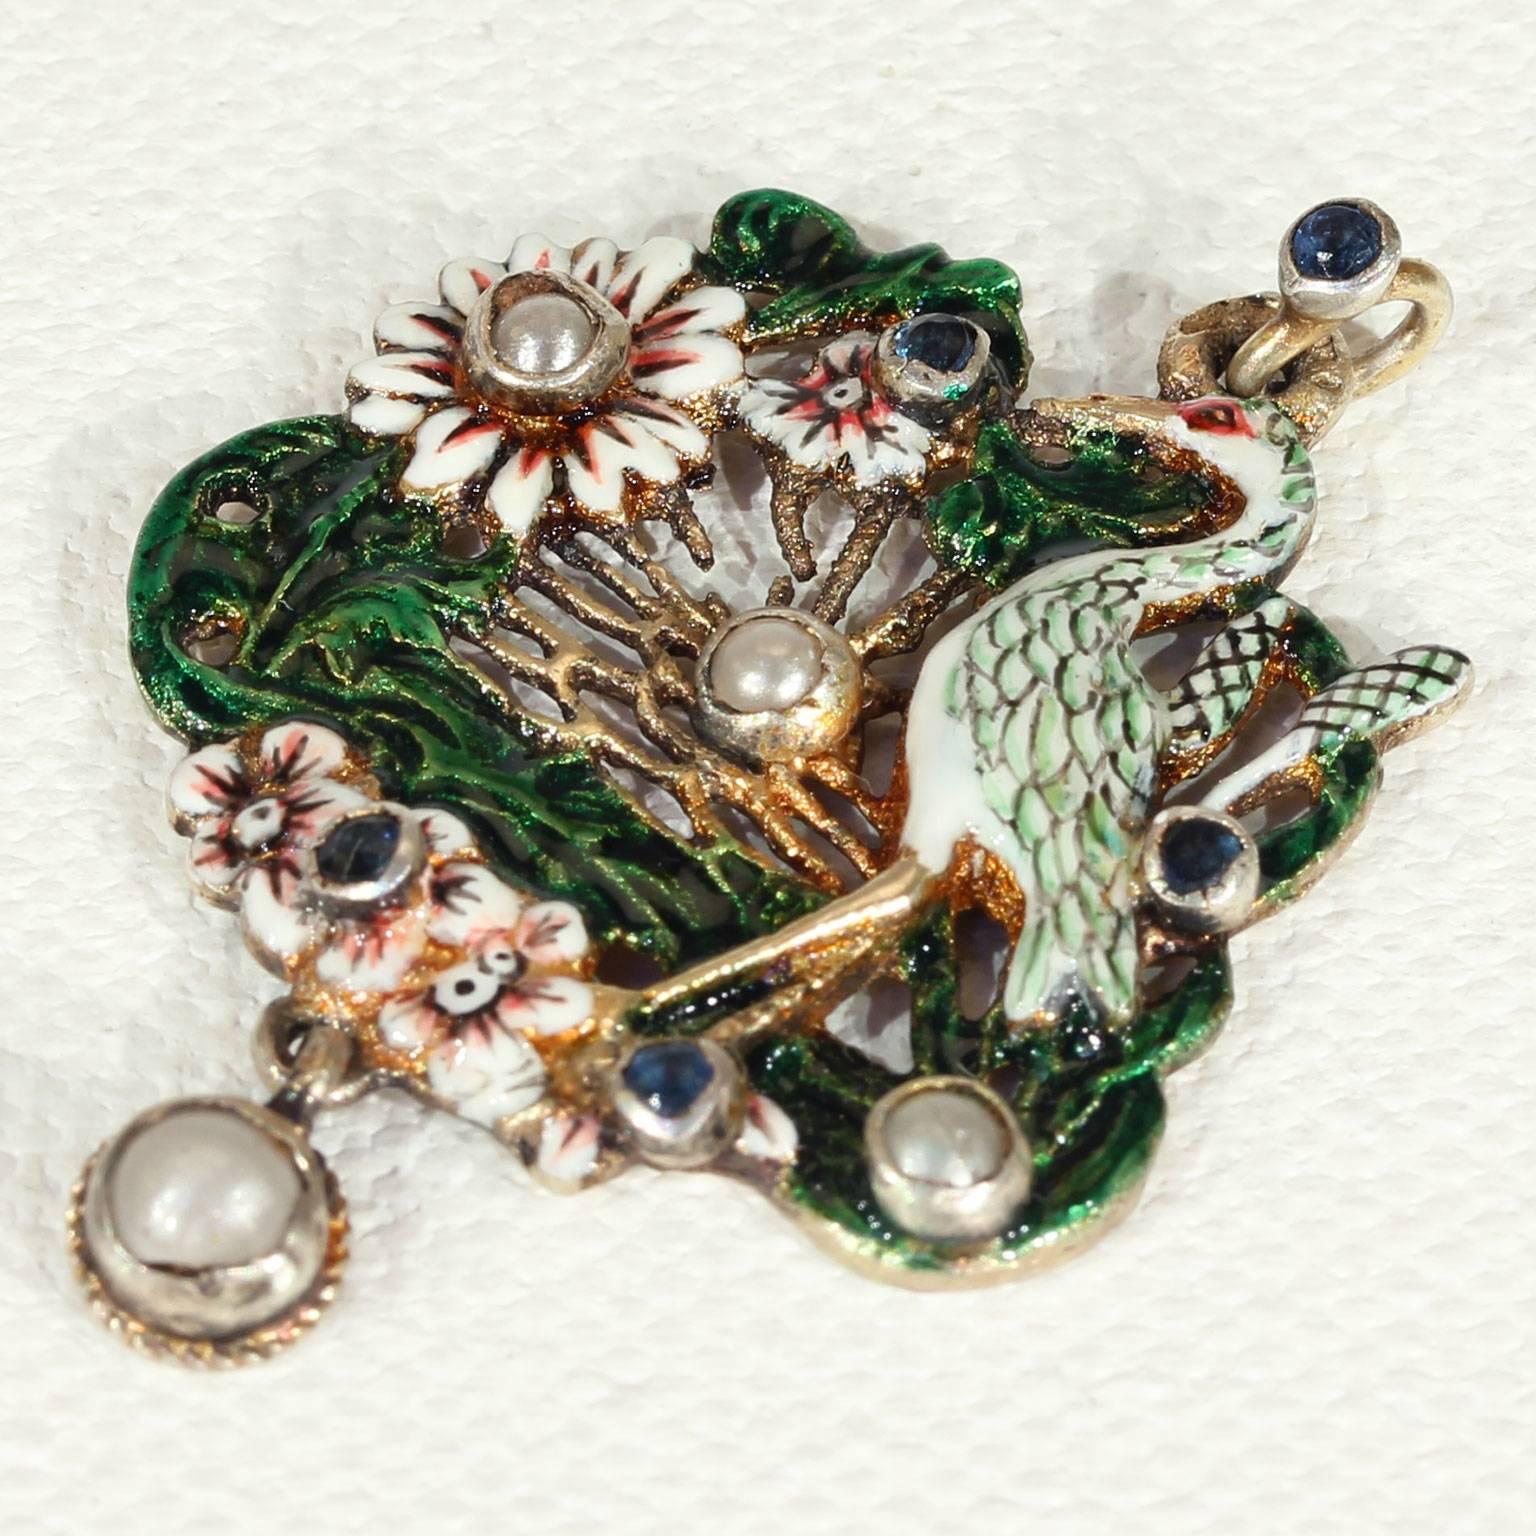 This fabulous antique Austro-Hungarian enamel pendant was handcrafted around 1870, and set in silver gilt. The highly-detailed stork motif shows the majestic bird in a detailed wonderland of flowers, set with pearls and sapphires. There’s a total of